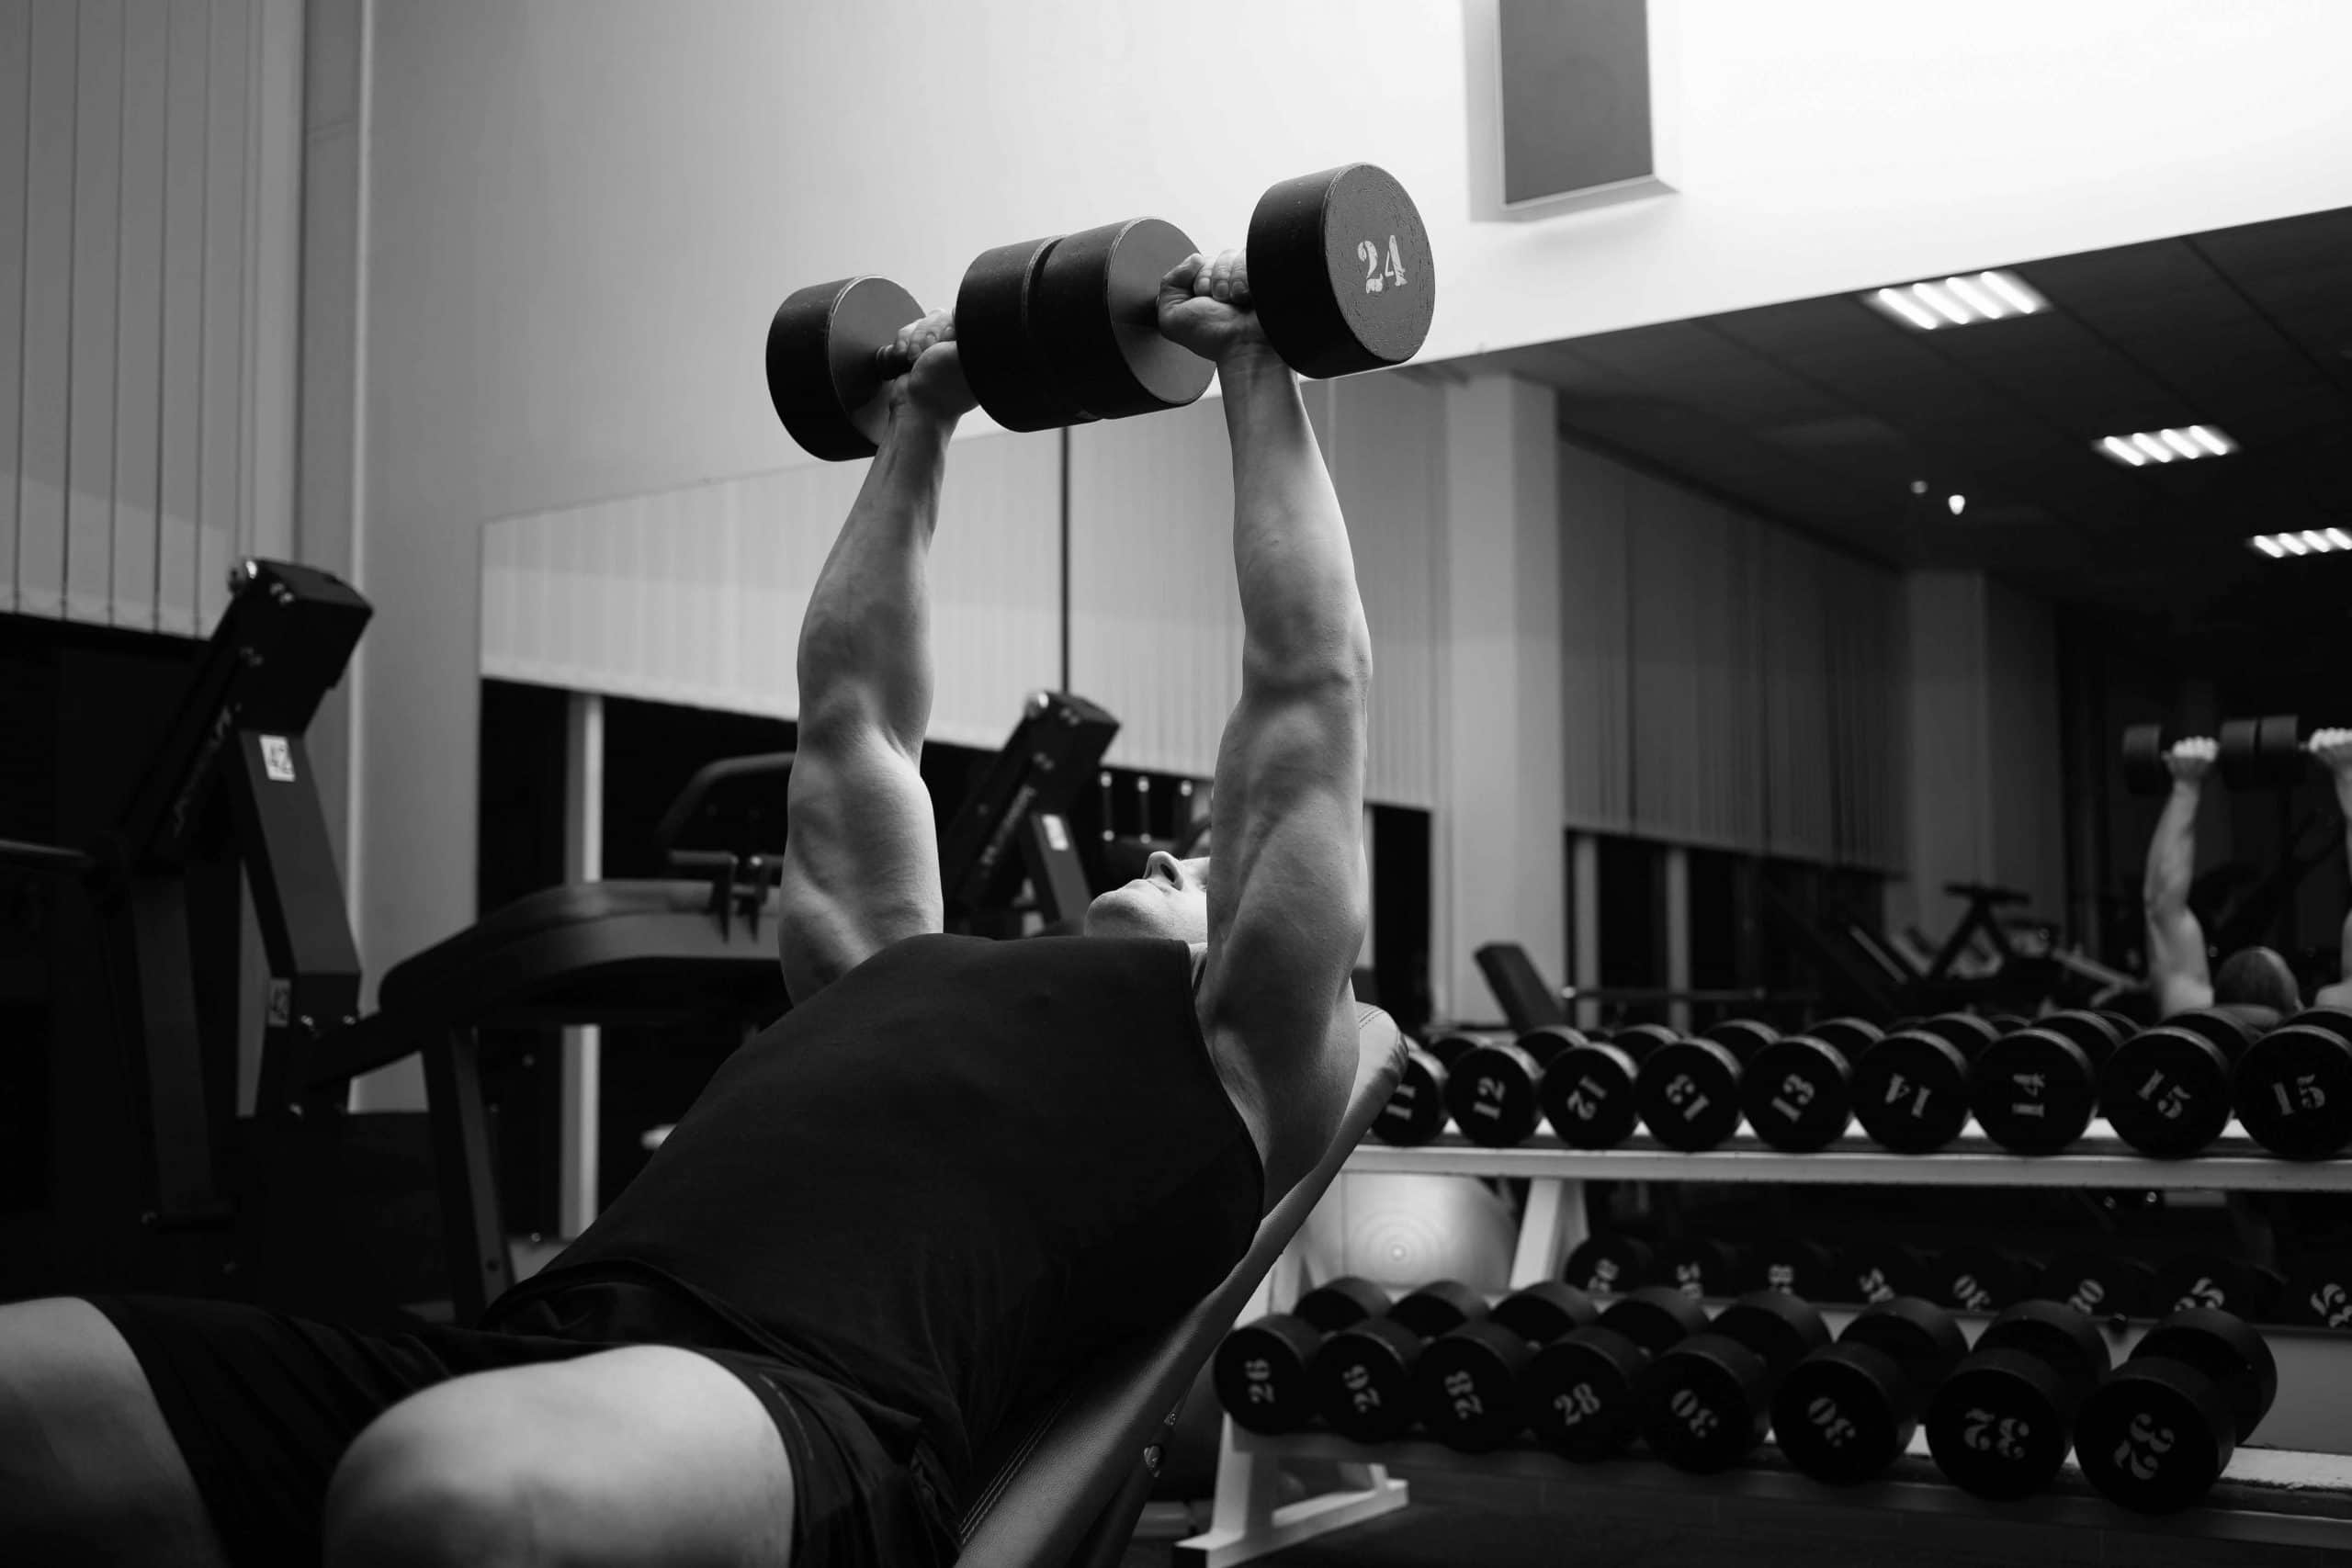 man-performs-an-exercise-with-dumbbells-on-a-simul-2021-10-21-02-41-19-utc-scaled.jpg